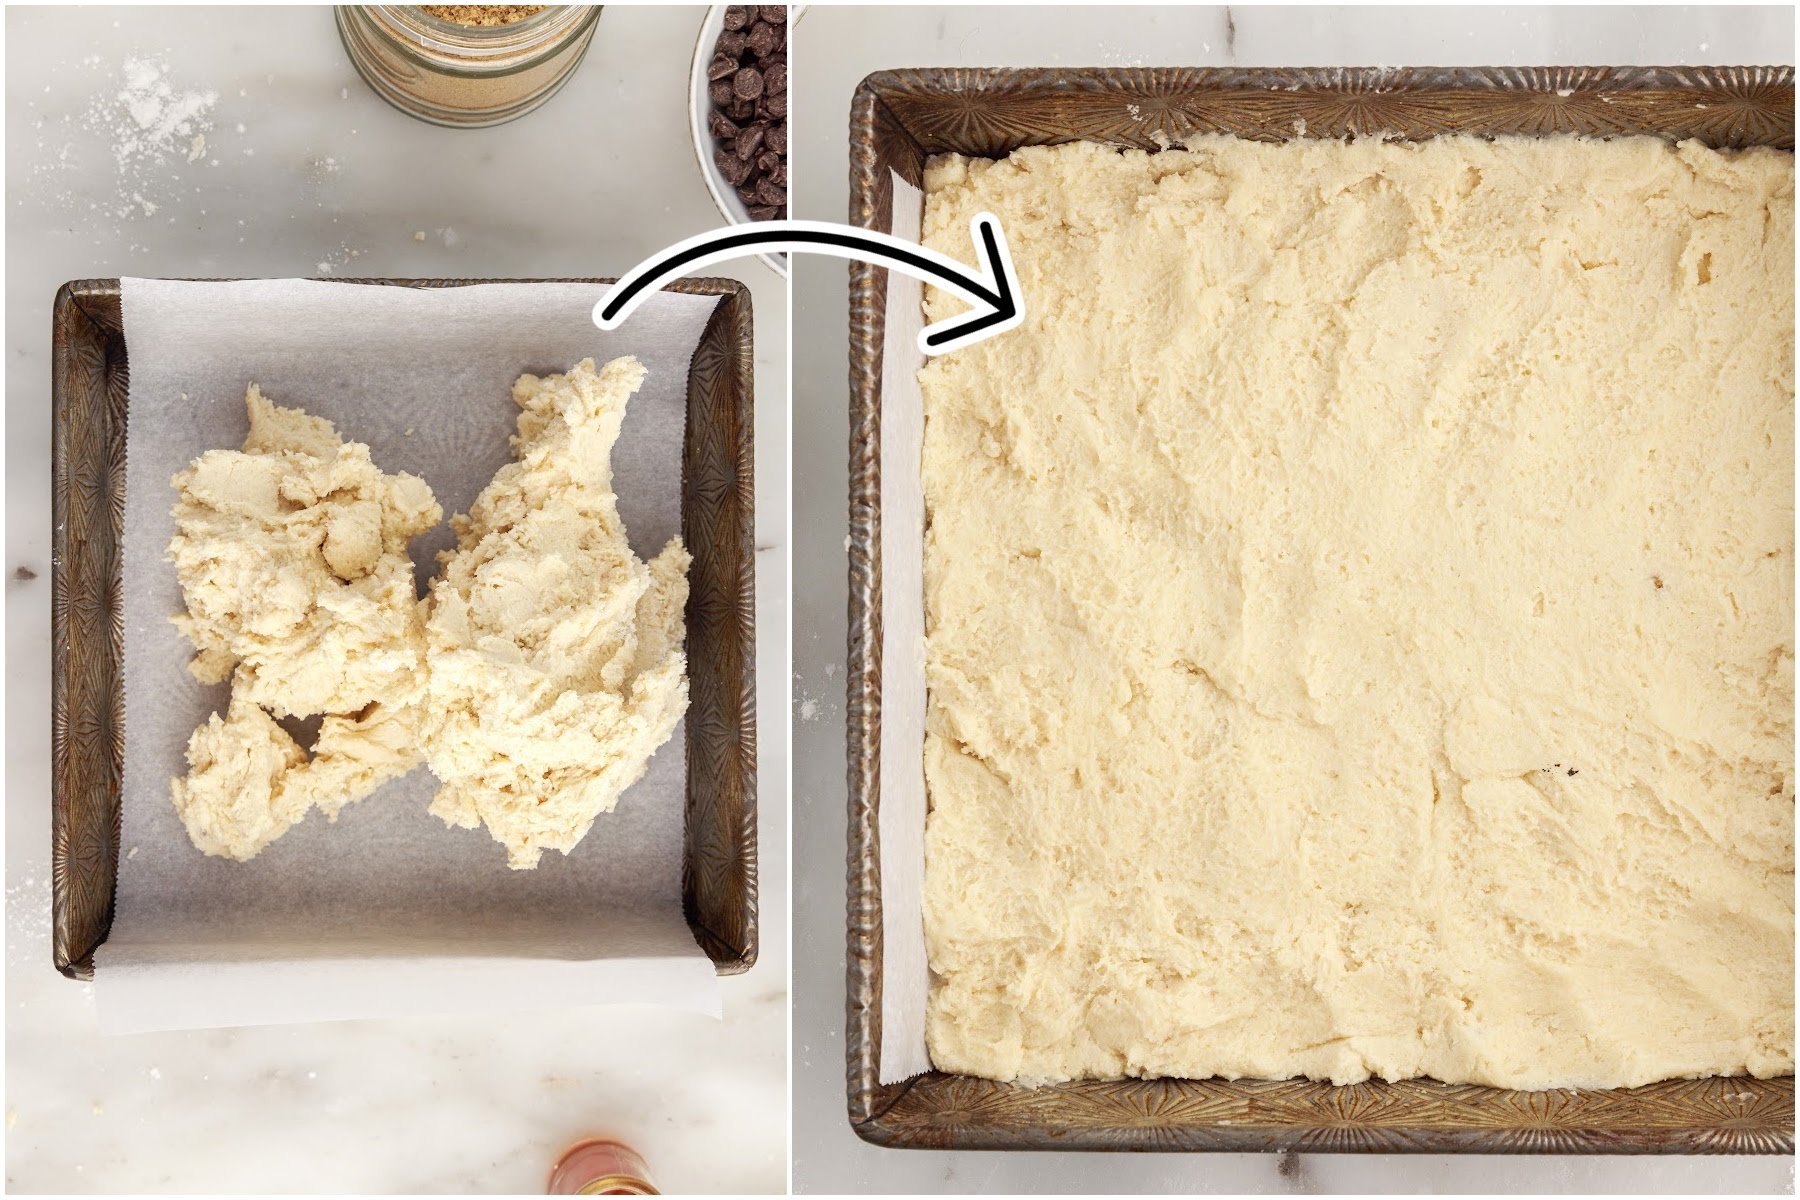 Two images of Millionaire Bar dough added to a parchment lined 8x8 and Millionaire Bar dough after being spread out.